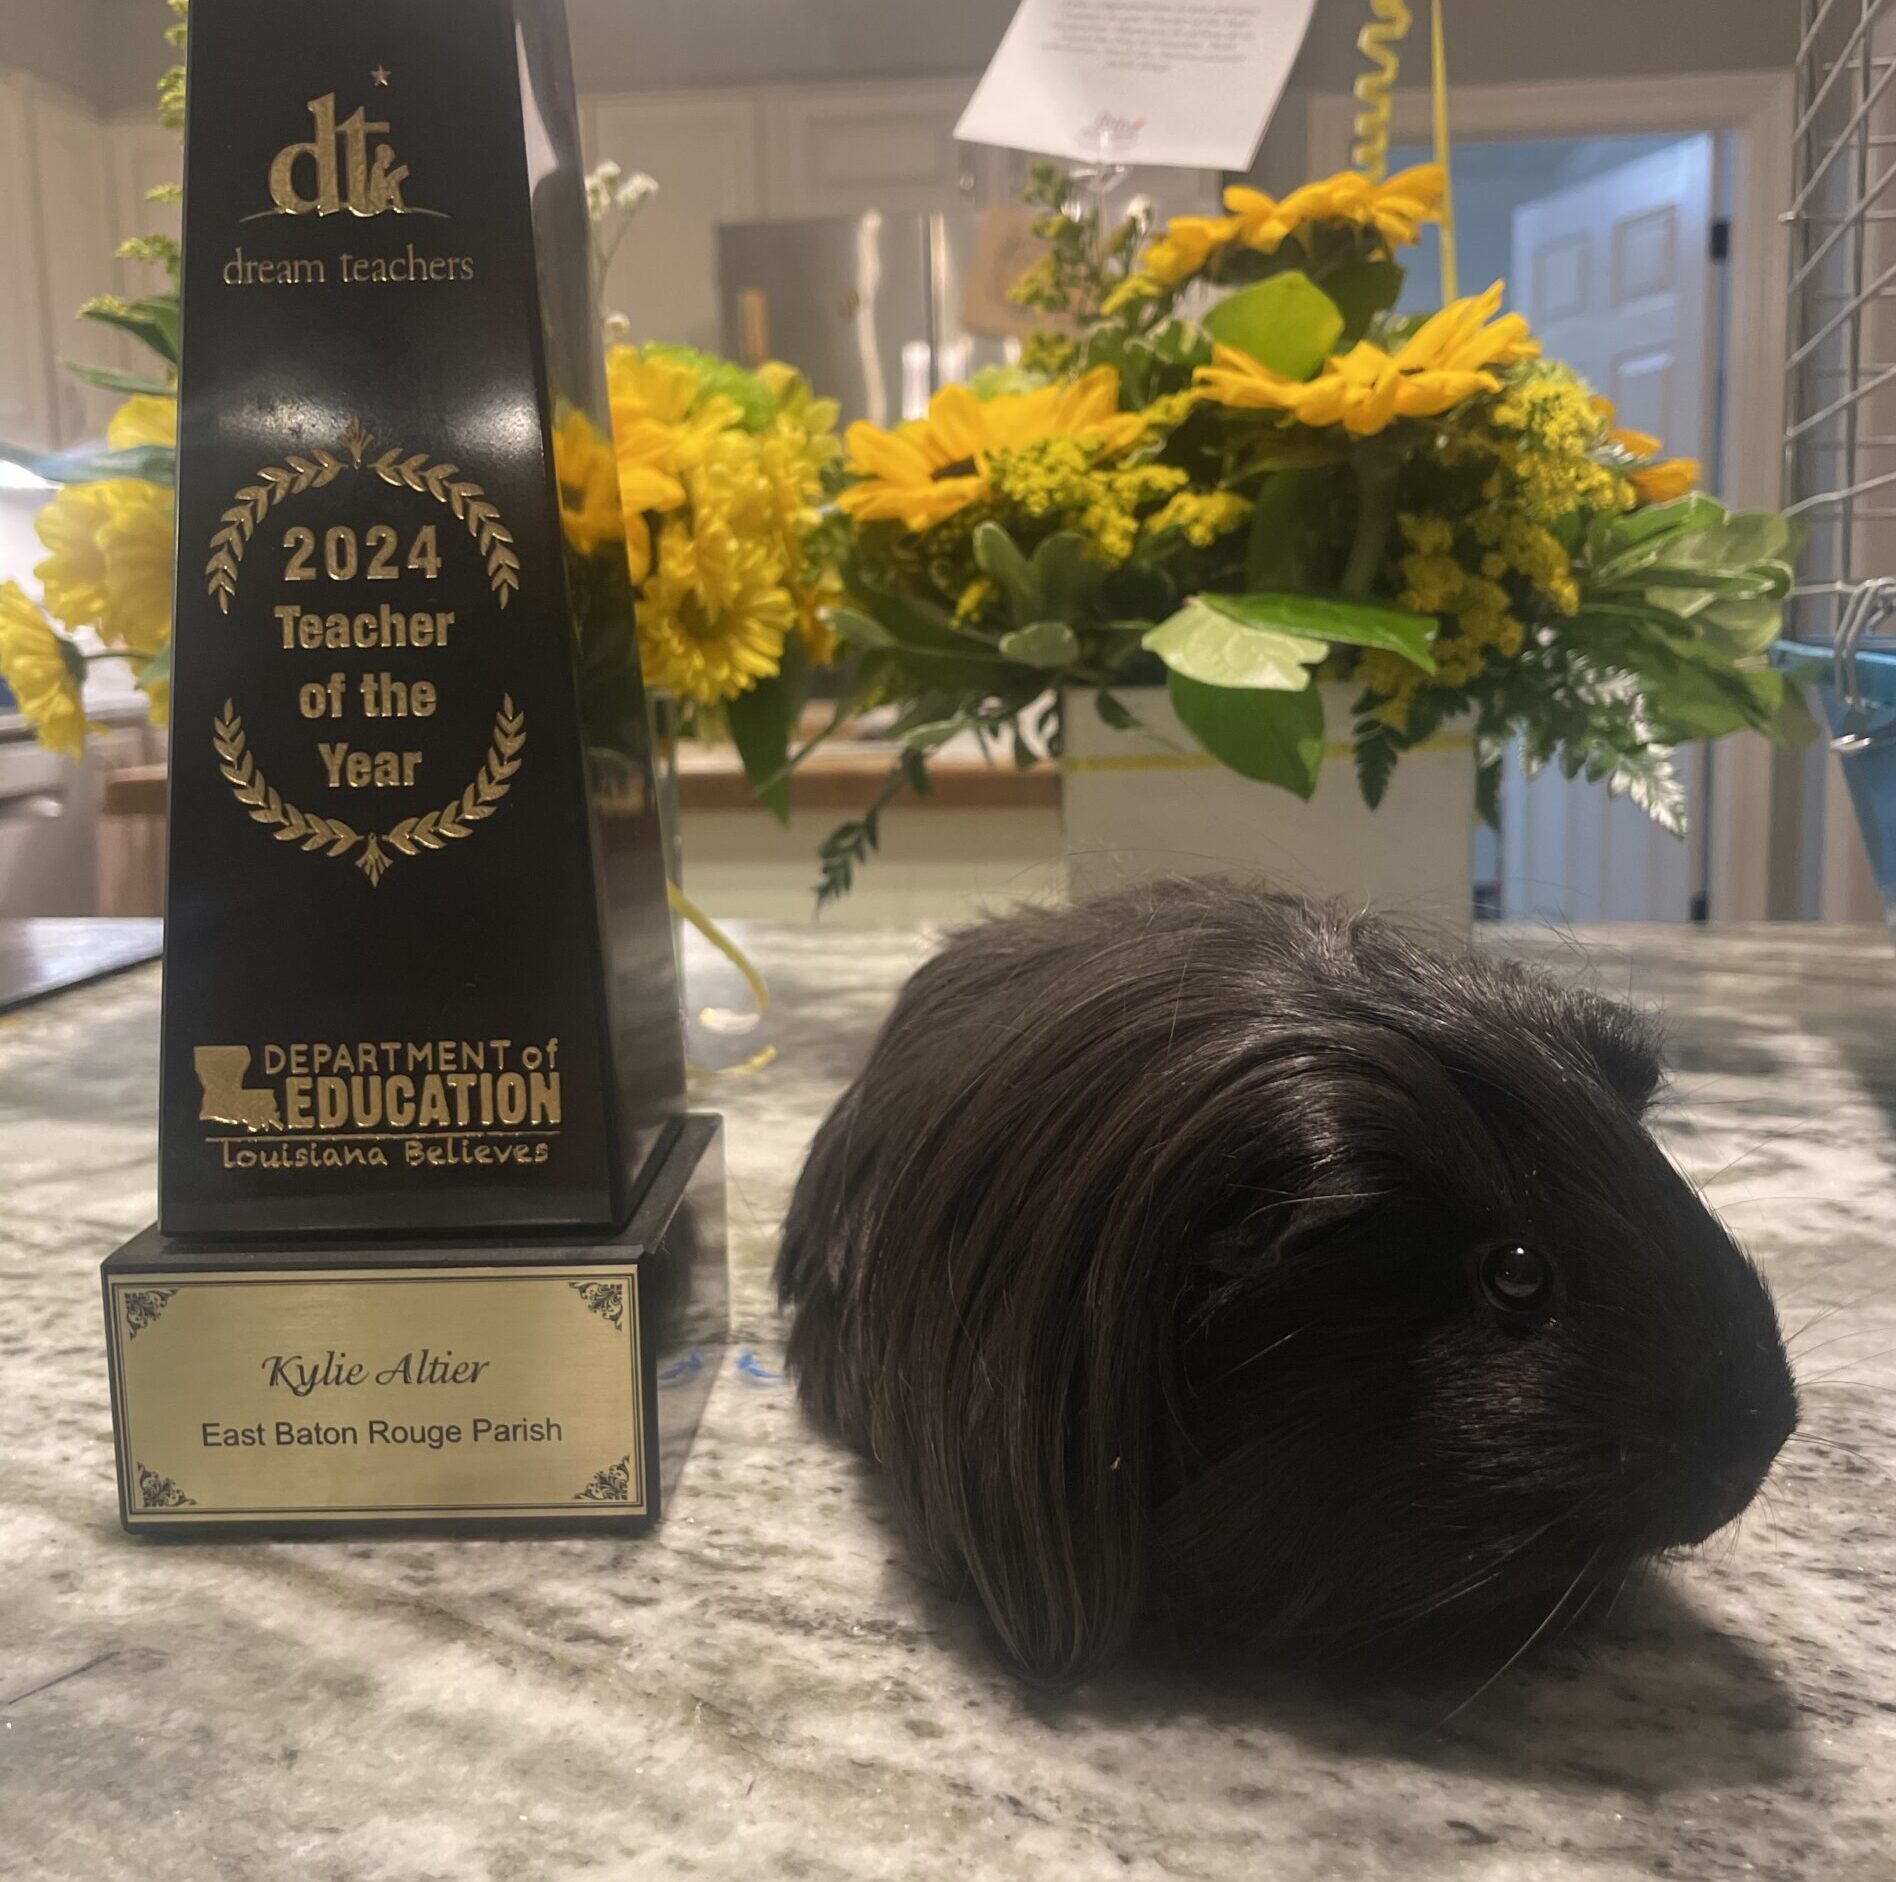 How the Classroom Guinea Pig Helped Win State Teacher of the Year